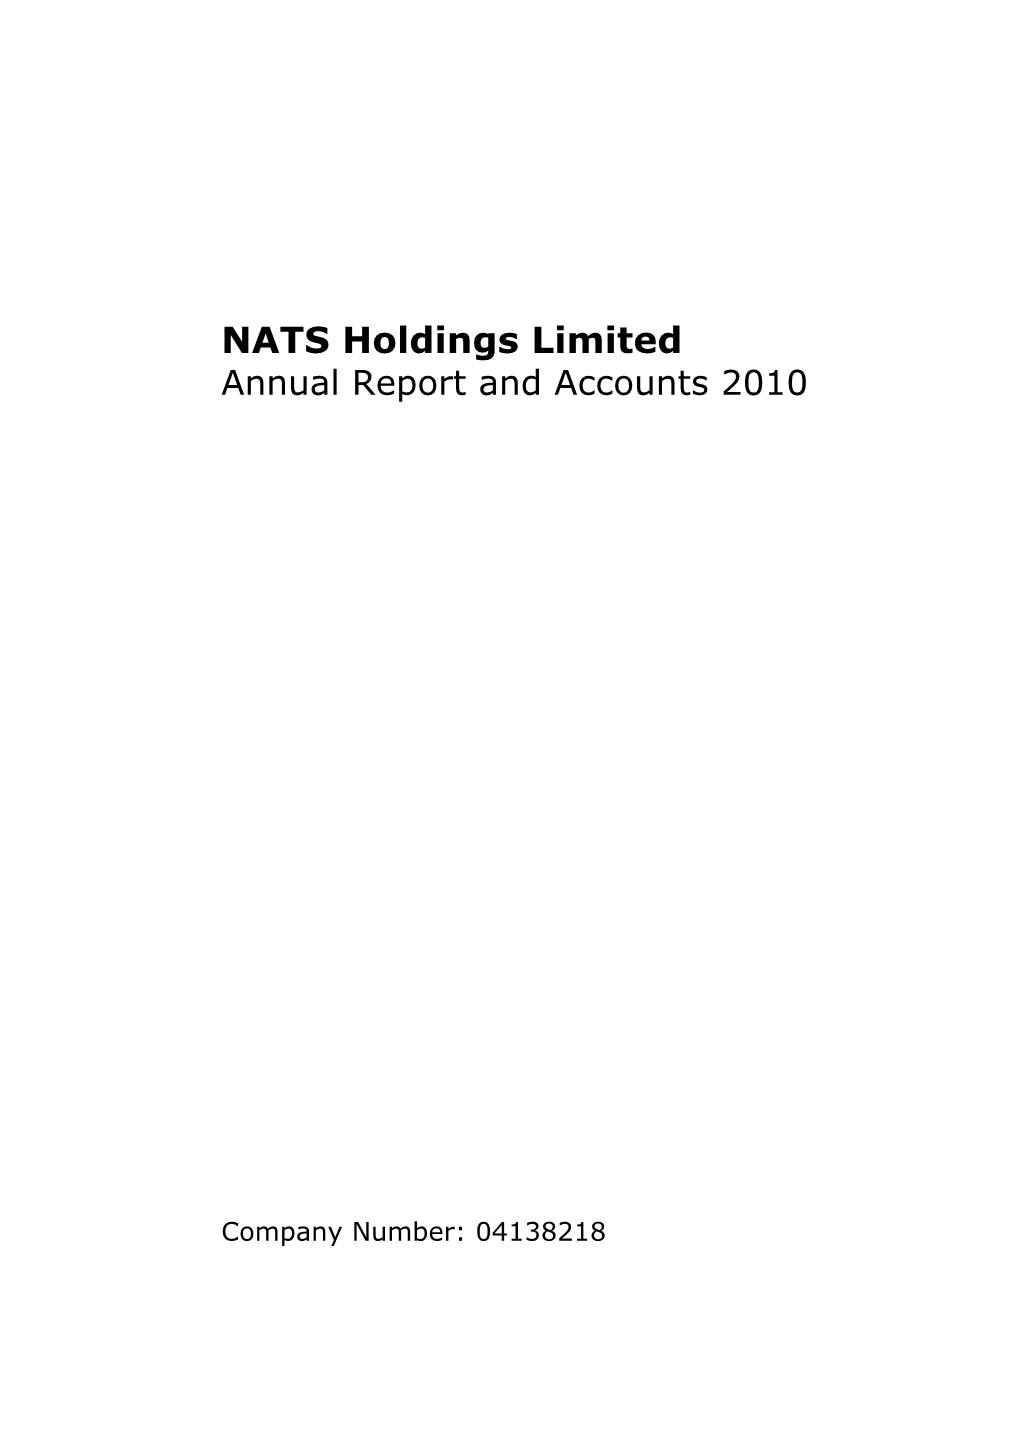 NATS Holdings Limited Annual Report and Accounts 2010